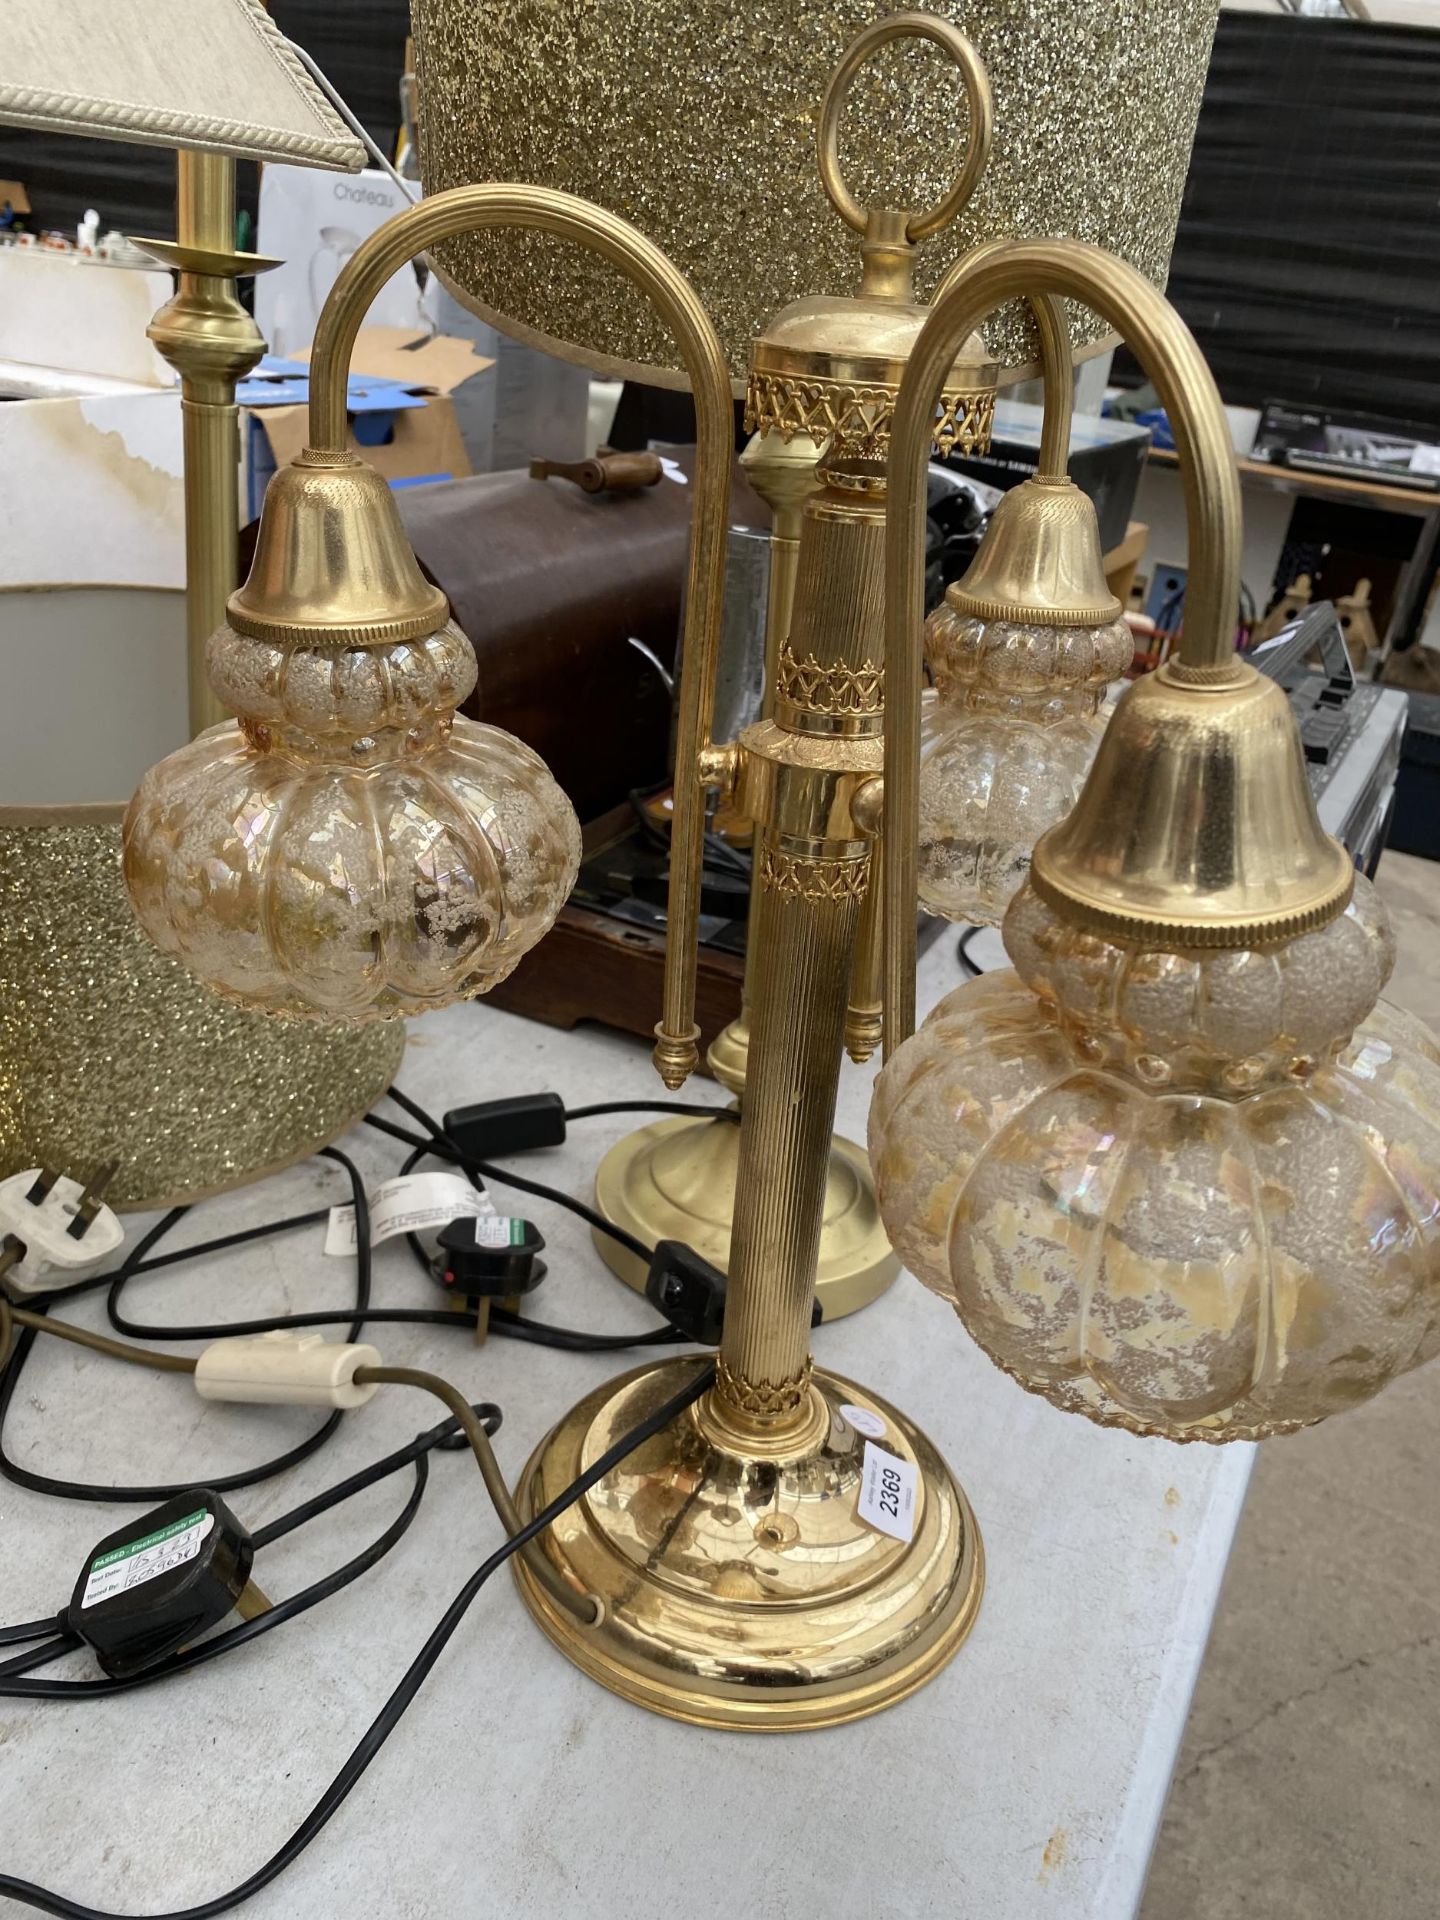 TWO DECORATIVE TABLE LAMPS - Image 2 of 4